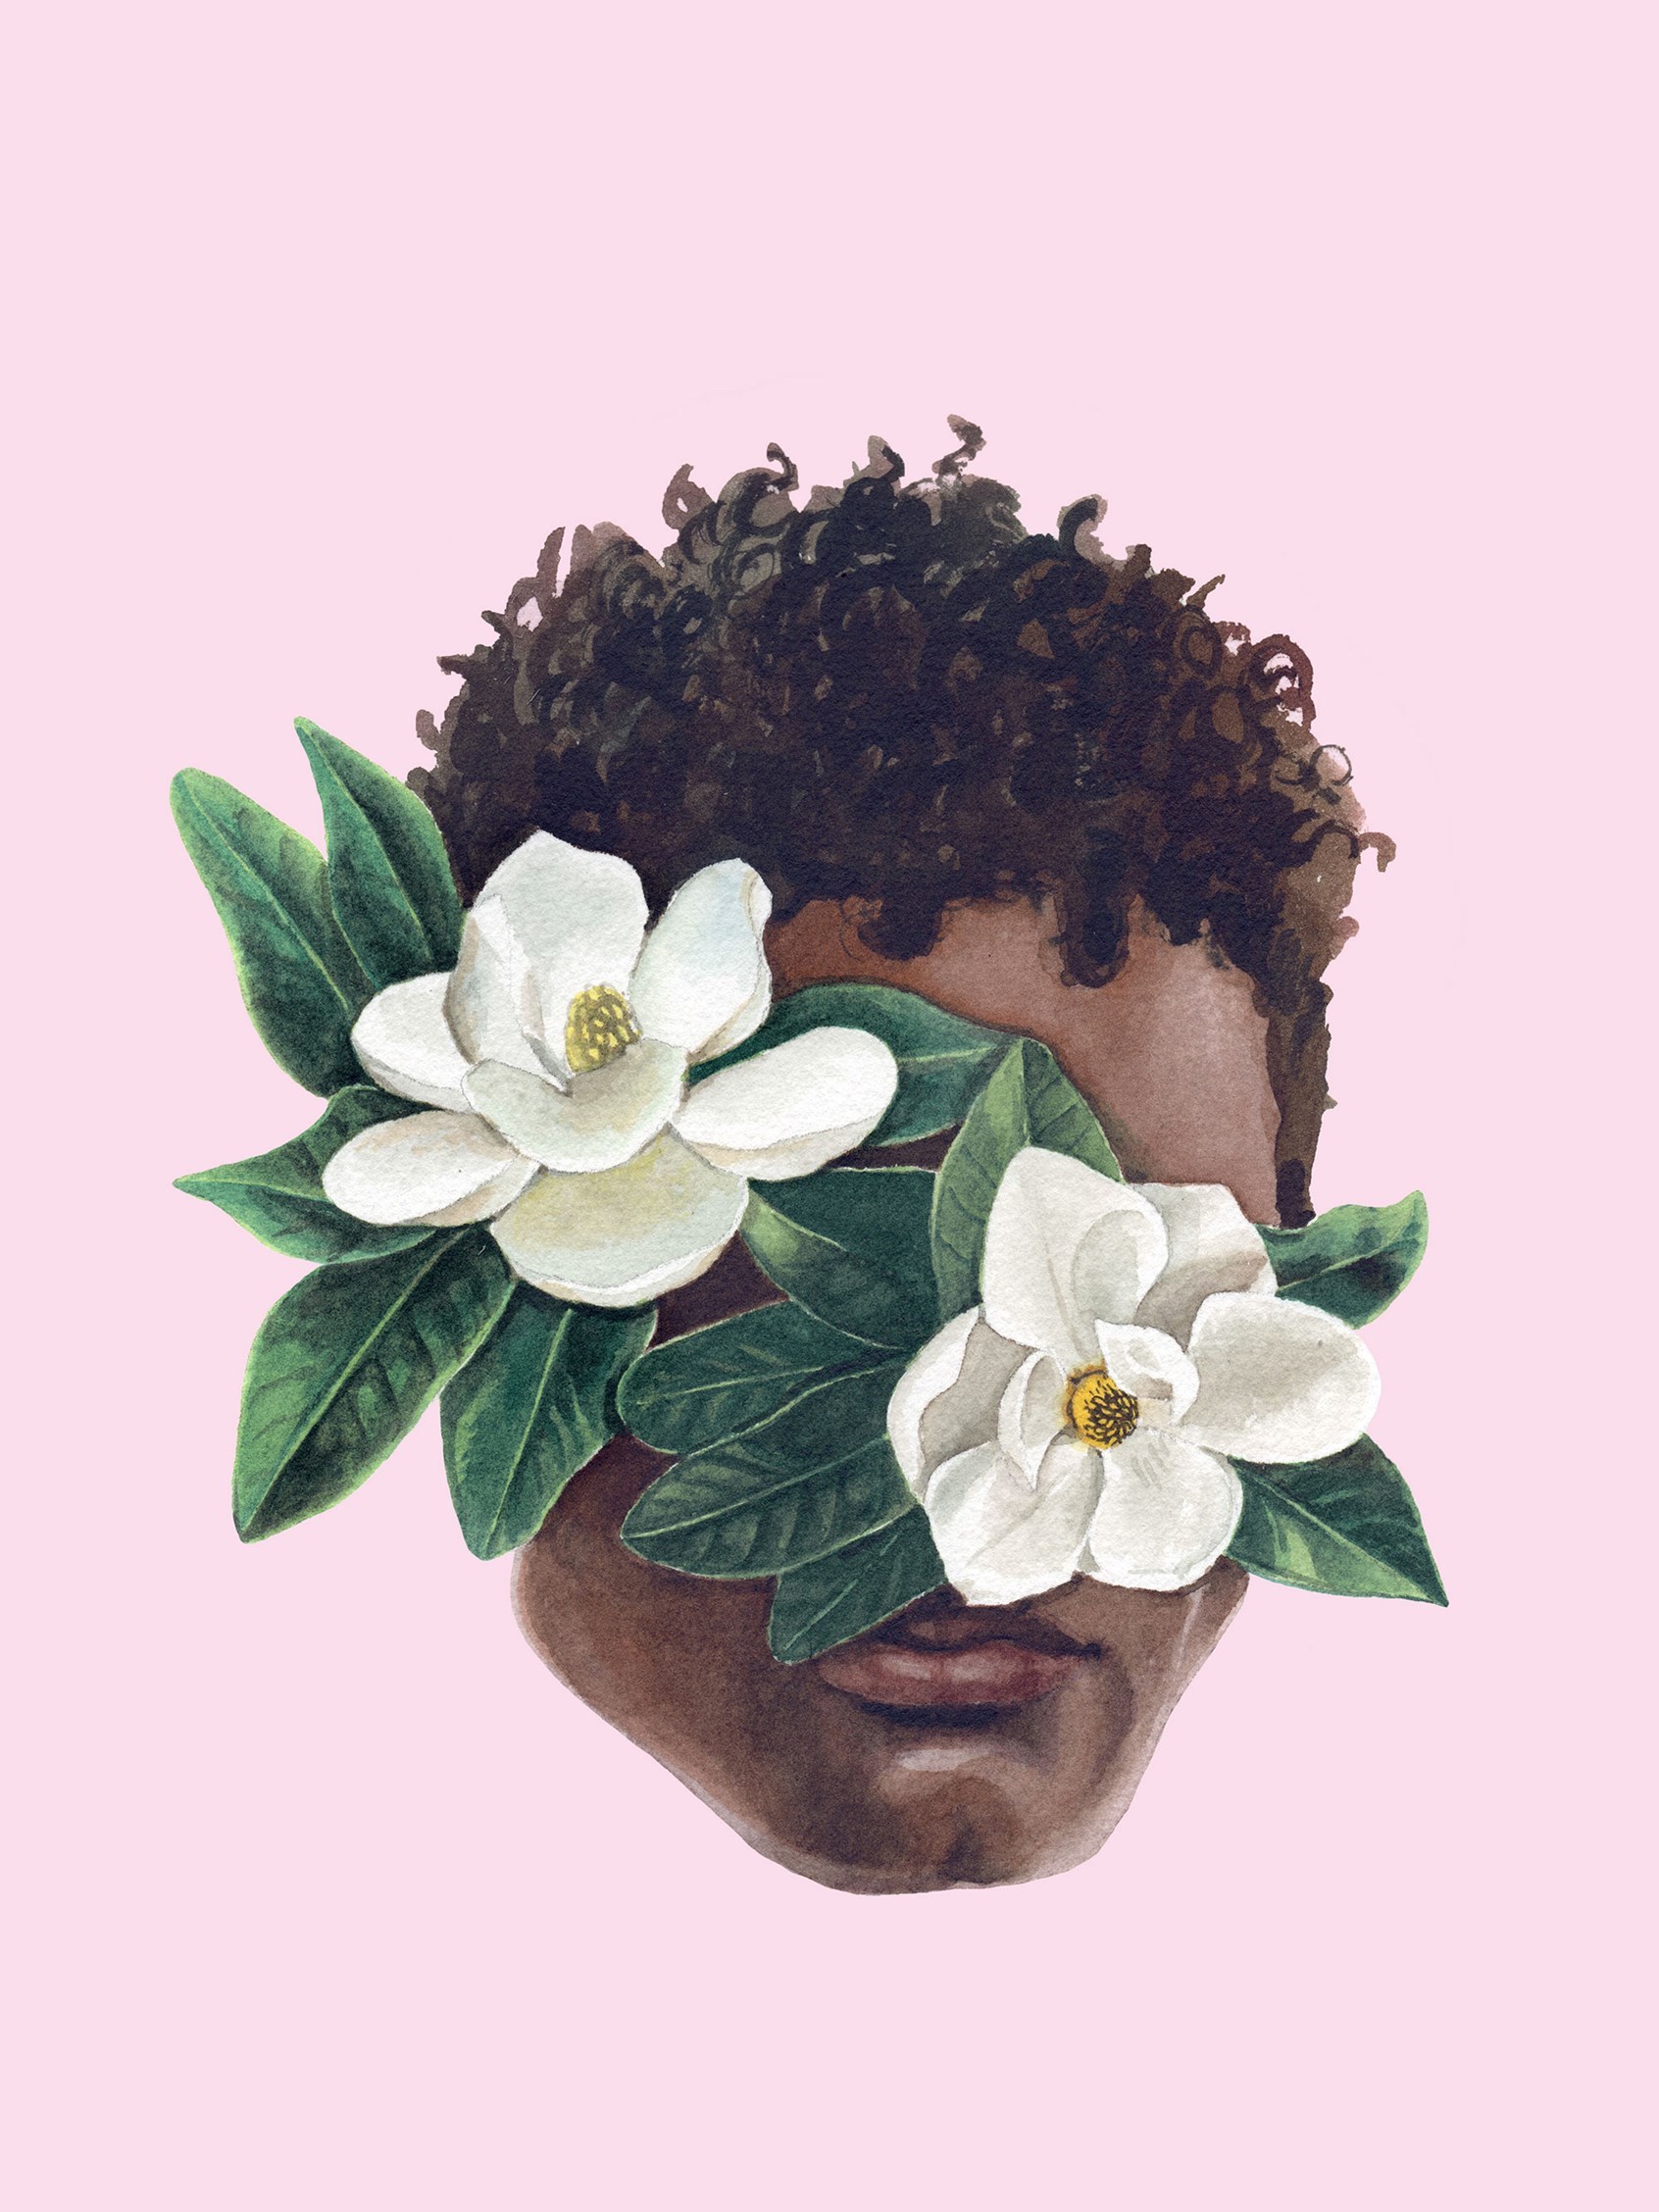 Portrait of a man's face obscured by flowers.